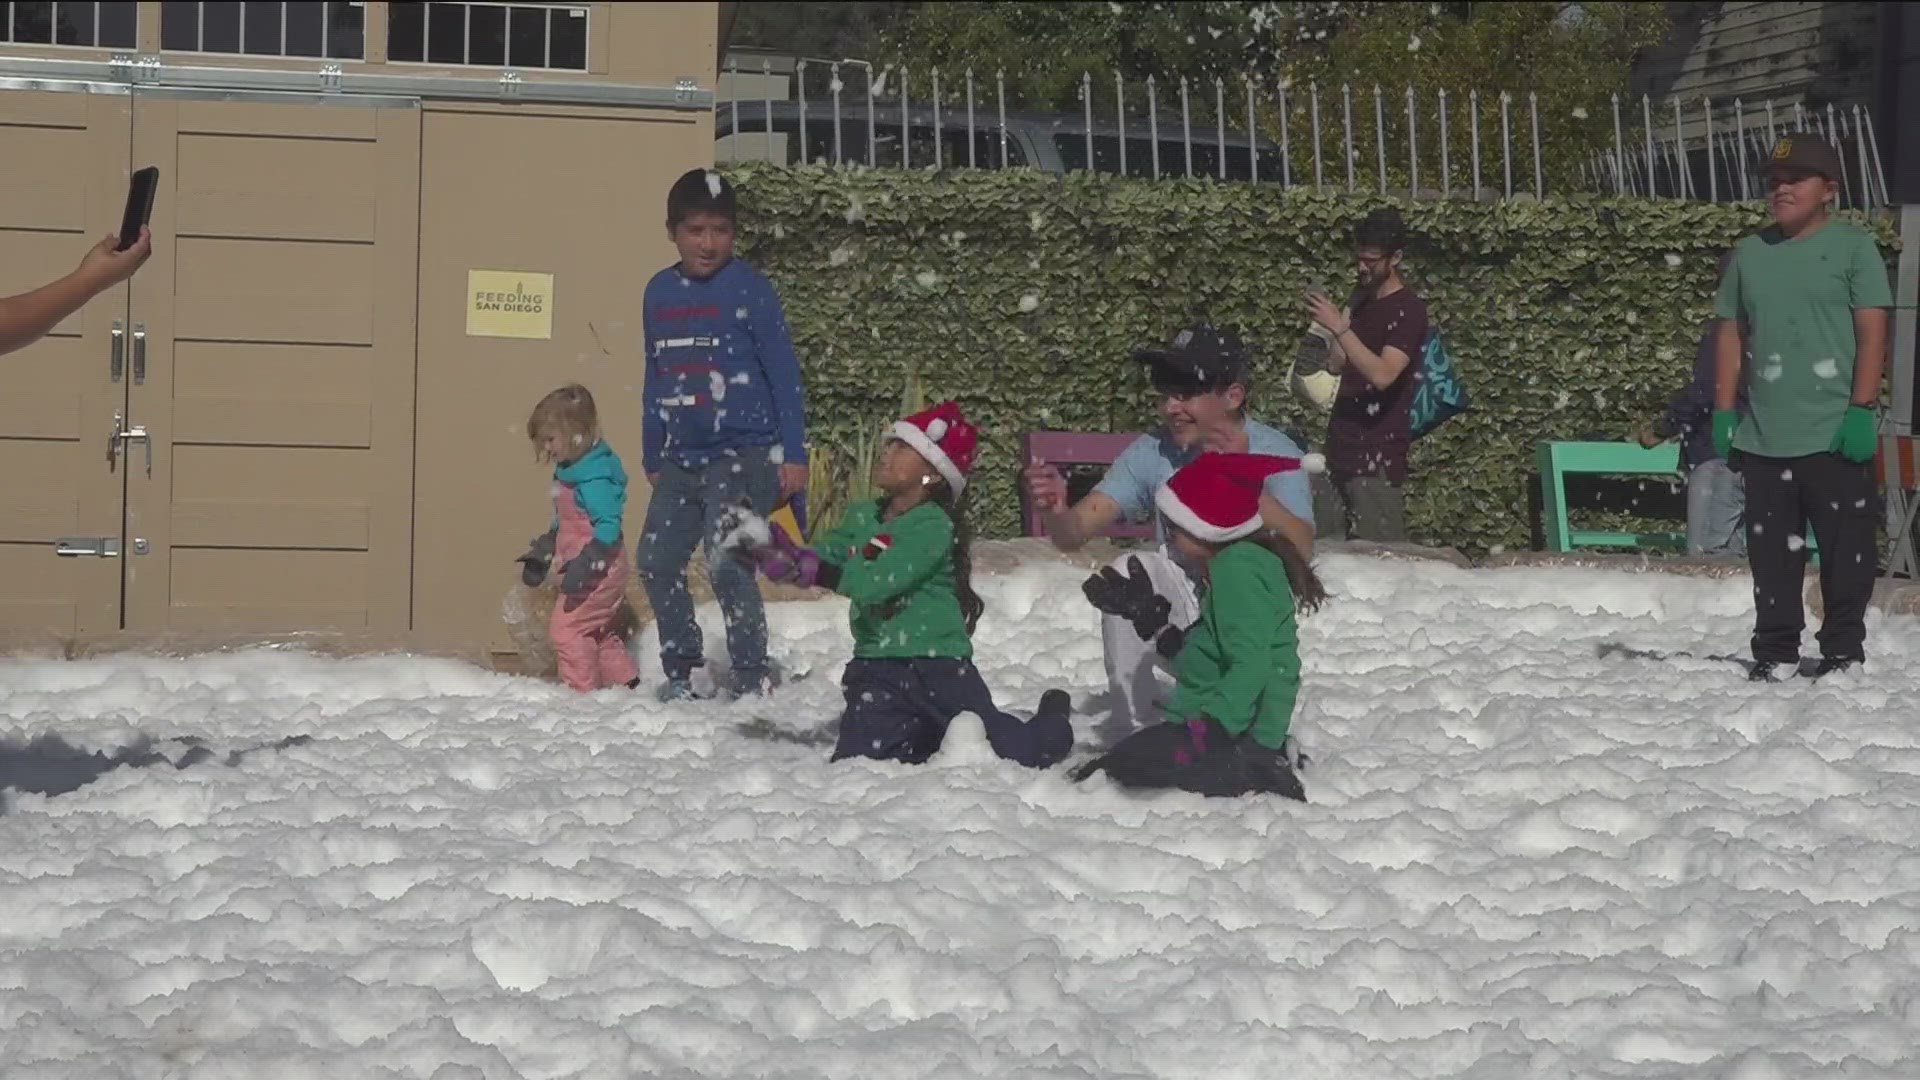 Children from underserved communities in Sherman Heights got a rare opportunity to play in the snow.